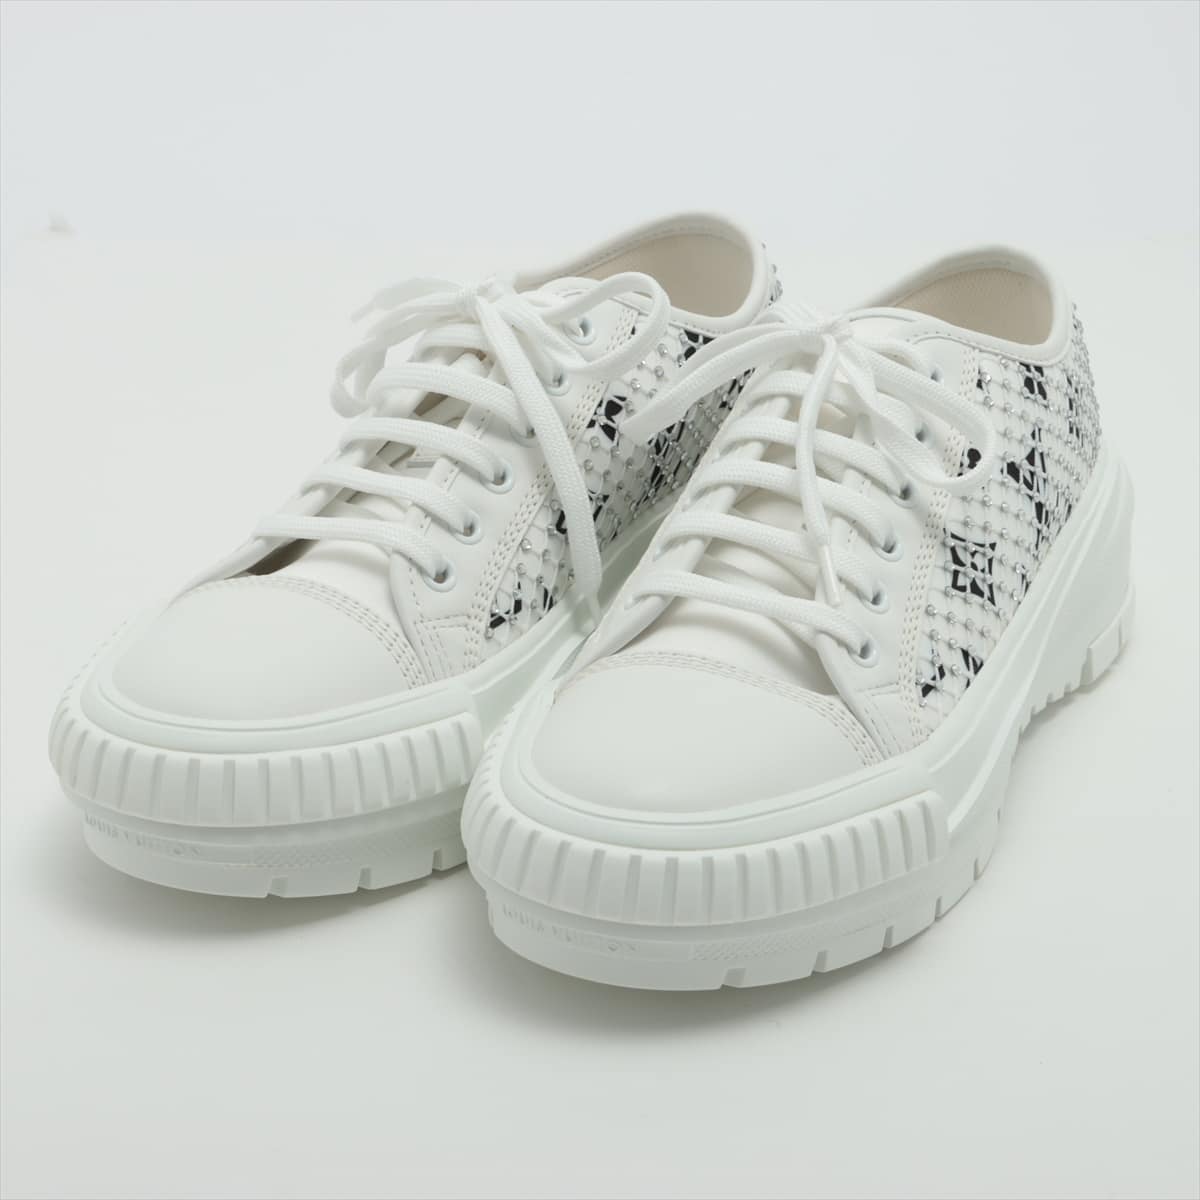 Louis Vuitton 21 years Mesh x leather Sneakers 38 Ladies' White VL0291 LV Squad Line